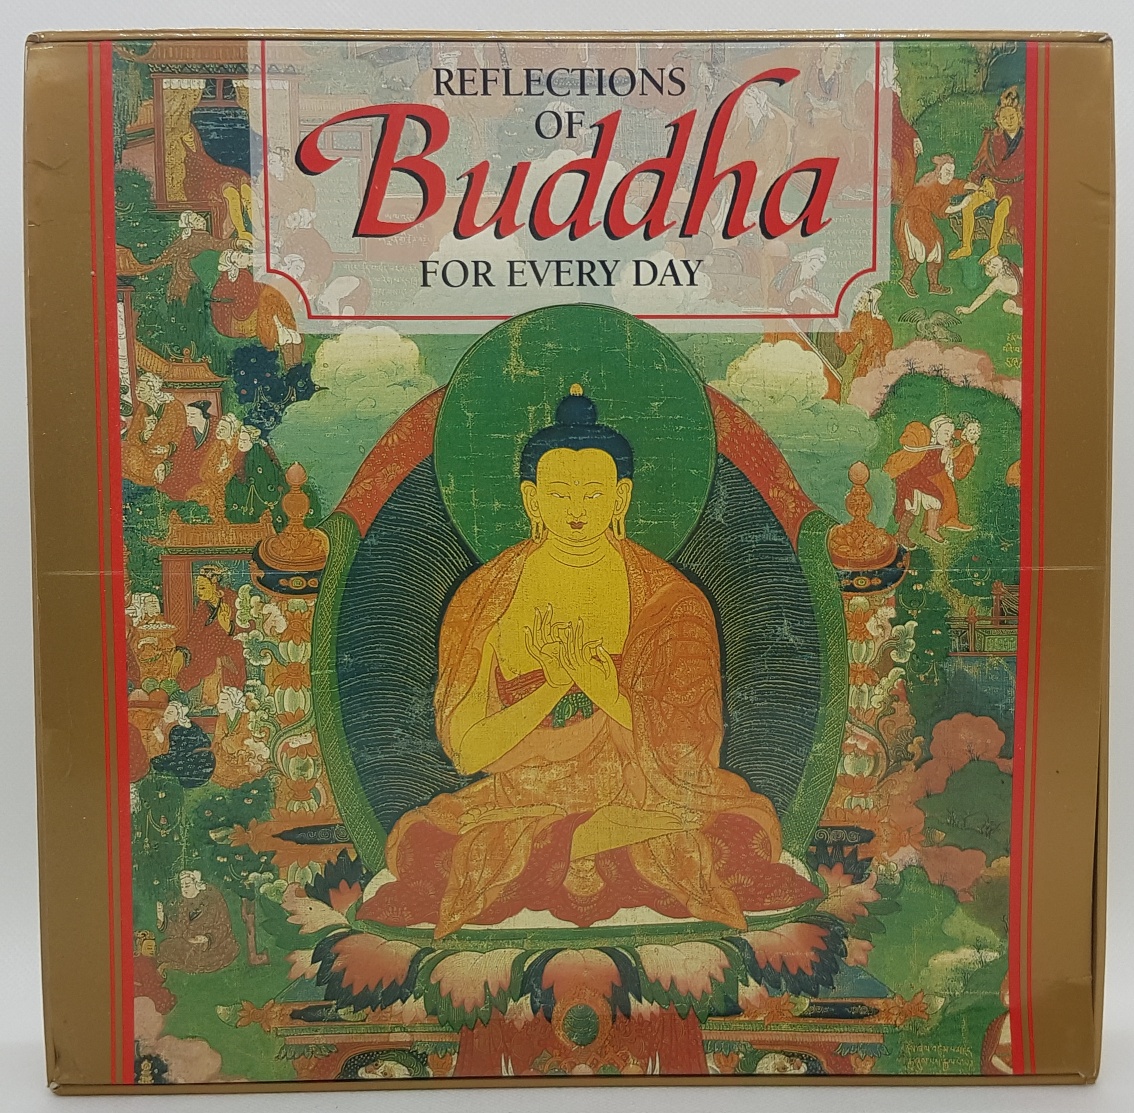 PRELOVED Reflections of Buddha for Every Day (366 meditation cards) - David Crosweller